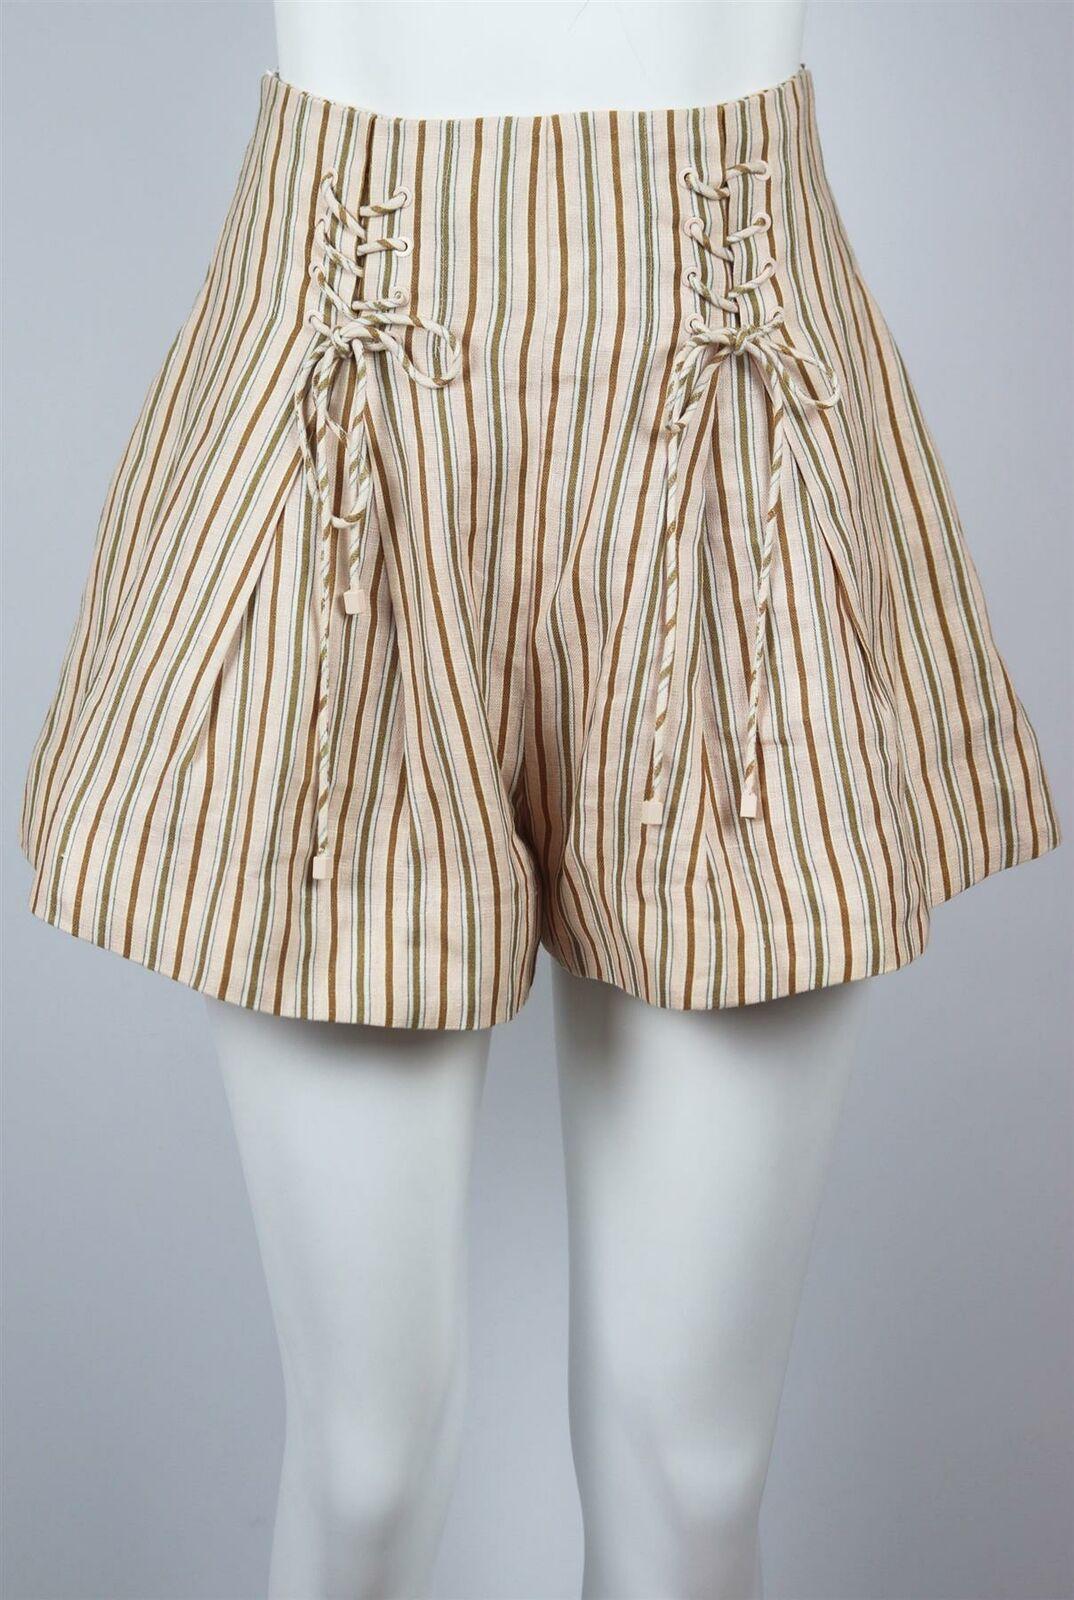 Zimmermann's light-pink, brown and ivory striped linen Painted shorts are cut for a skirt-like volume that falls from a high-rise with corset-style around the waist.
Light-pink, brown and ivory linen.
Zip fastening at back.
100% Linen; lining: 51%